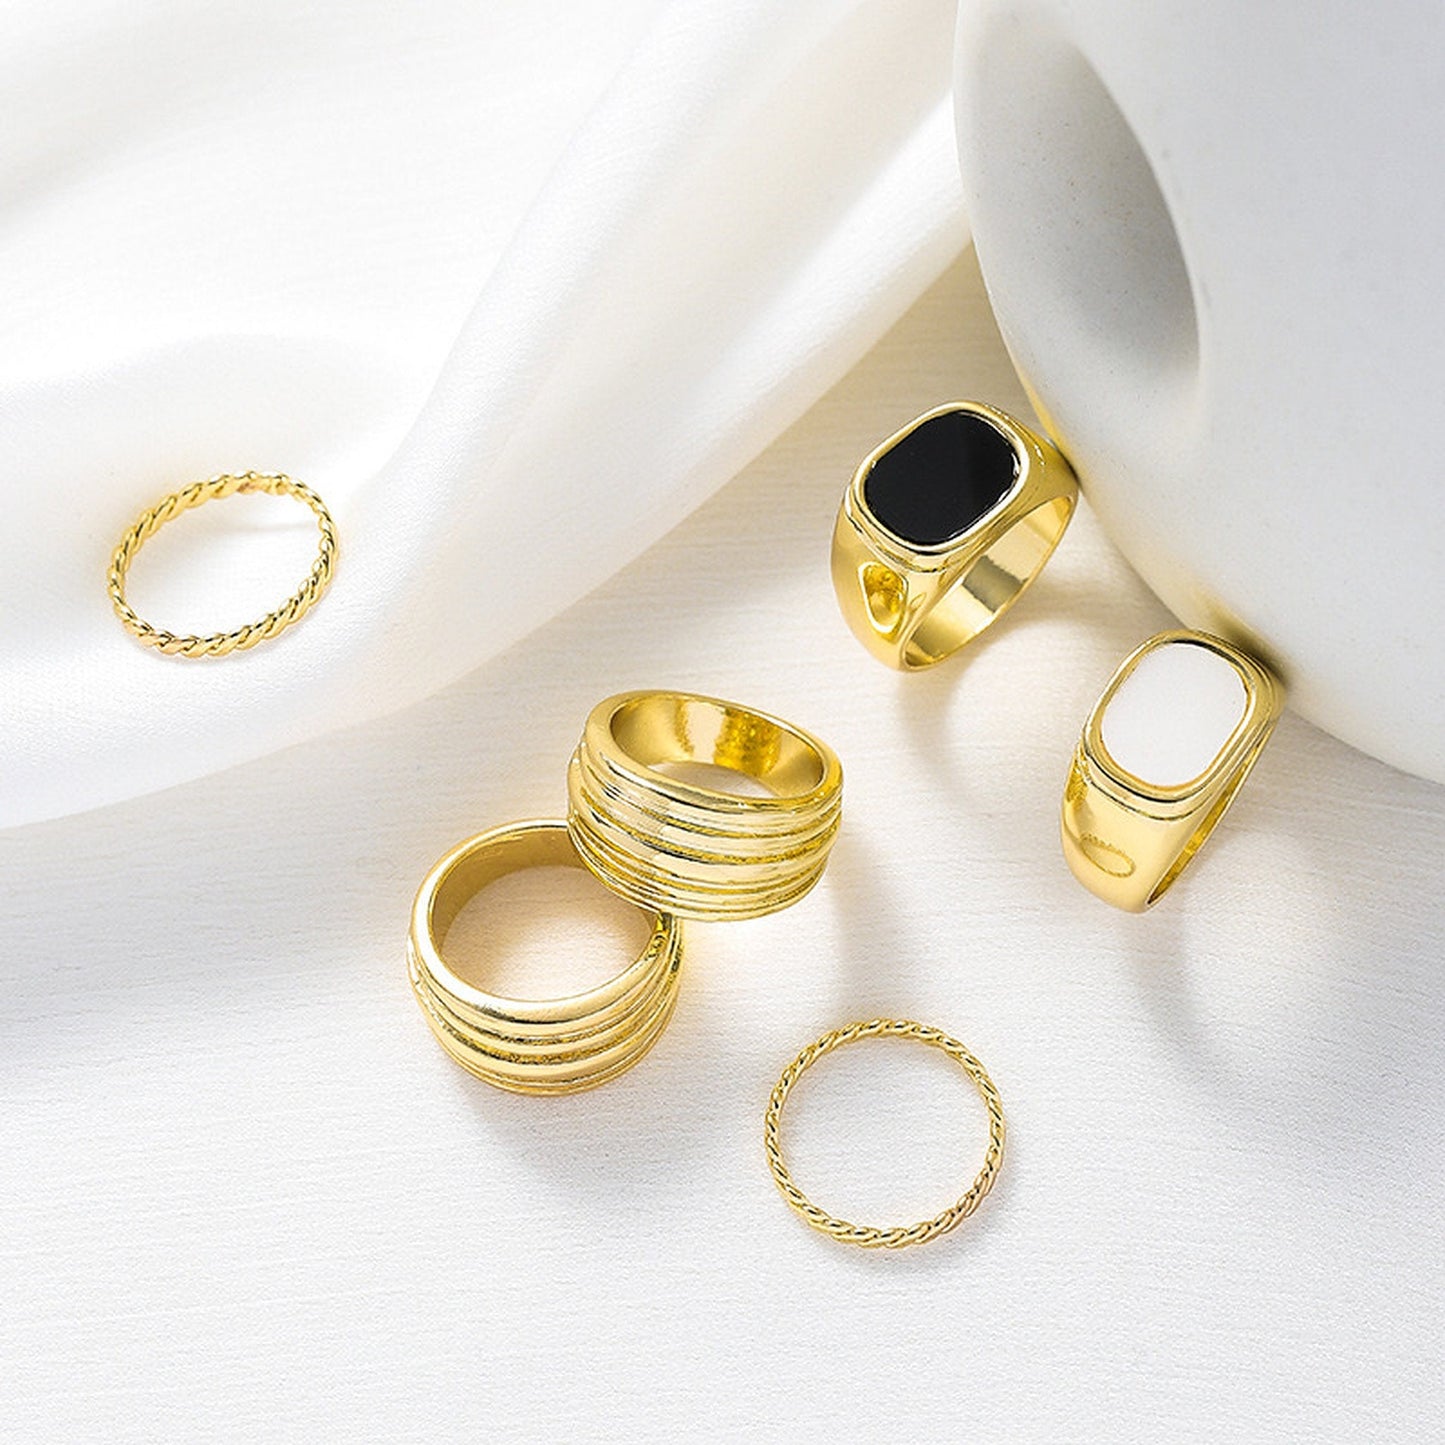 K-pop Chunky Rings, Black and White Ring Set, Gold Vine Twisted Ring, Punk Ring Set, Wide Band Ring, Signet Ring, Statement Cocktail Ring